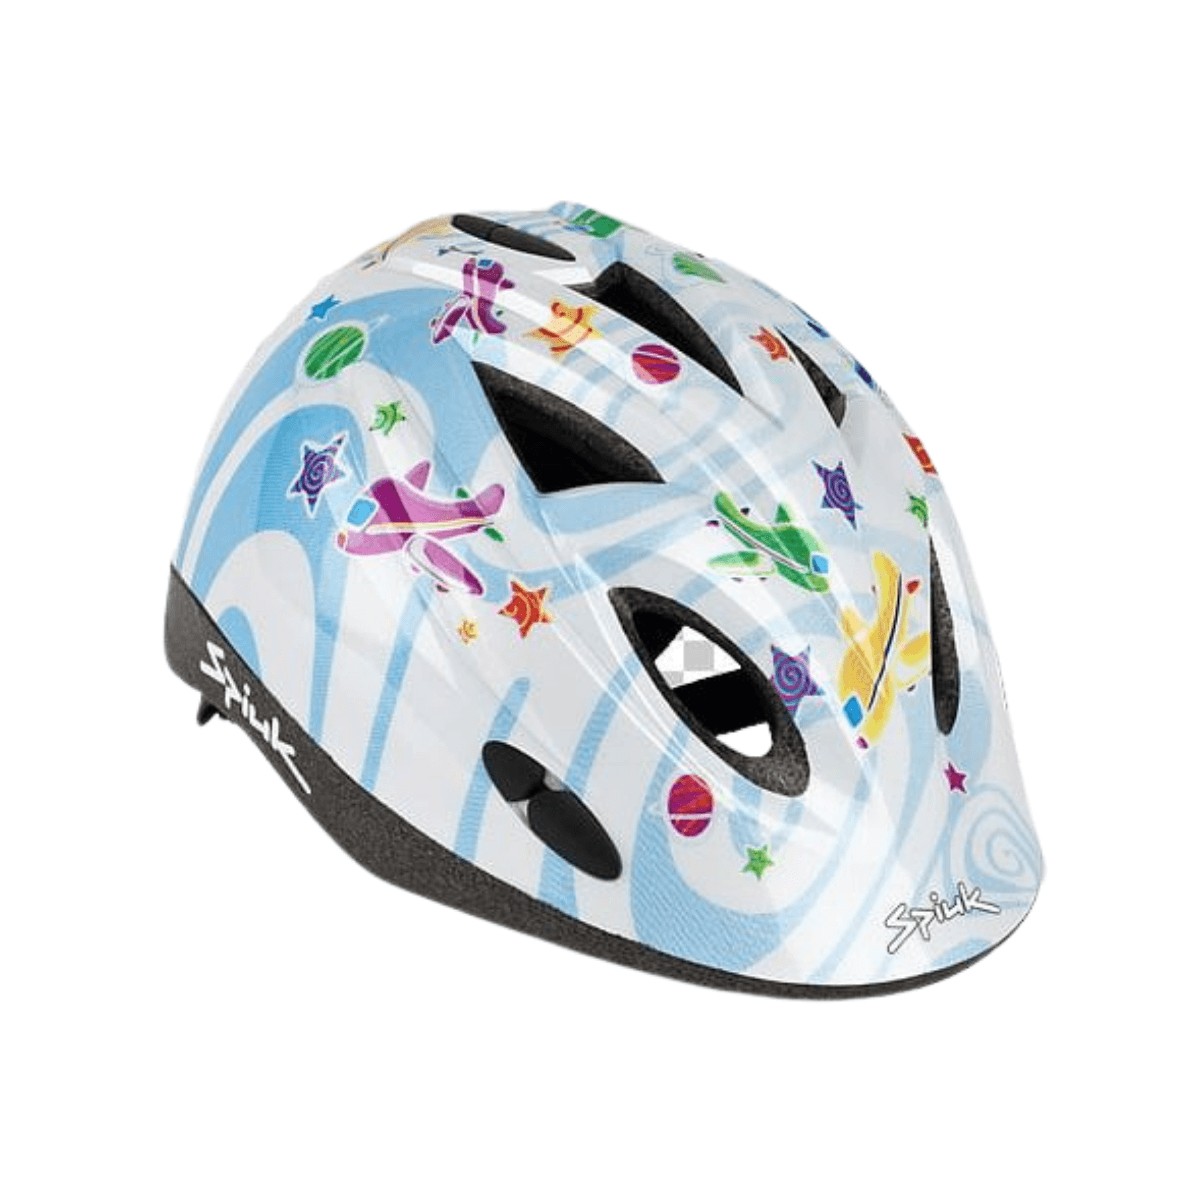 Spiuk Kids Planets Helmet, Size One Size